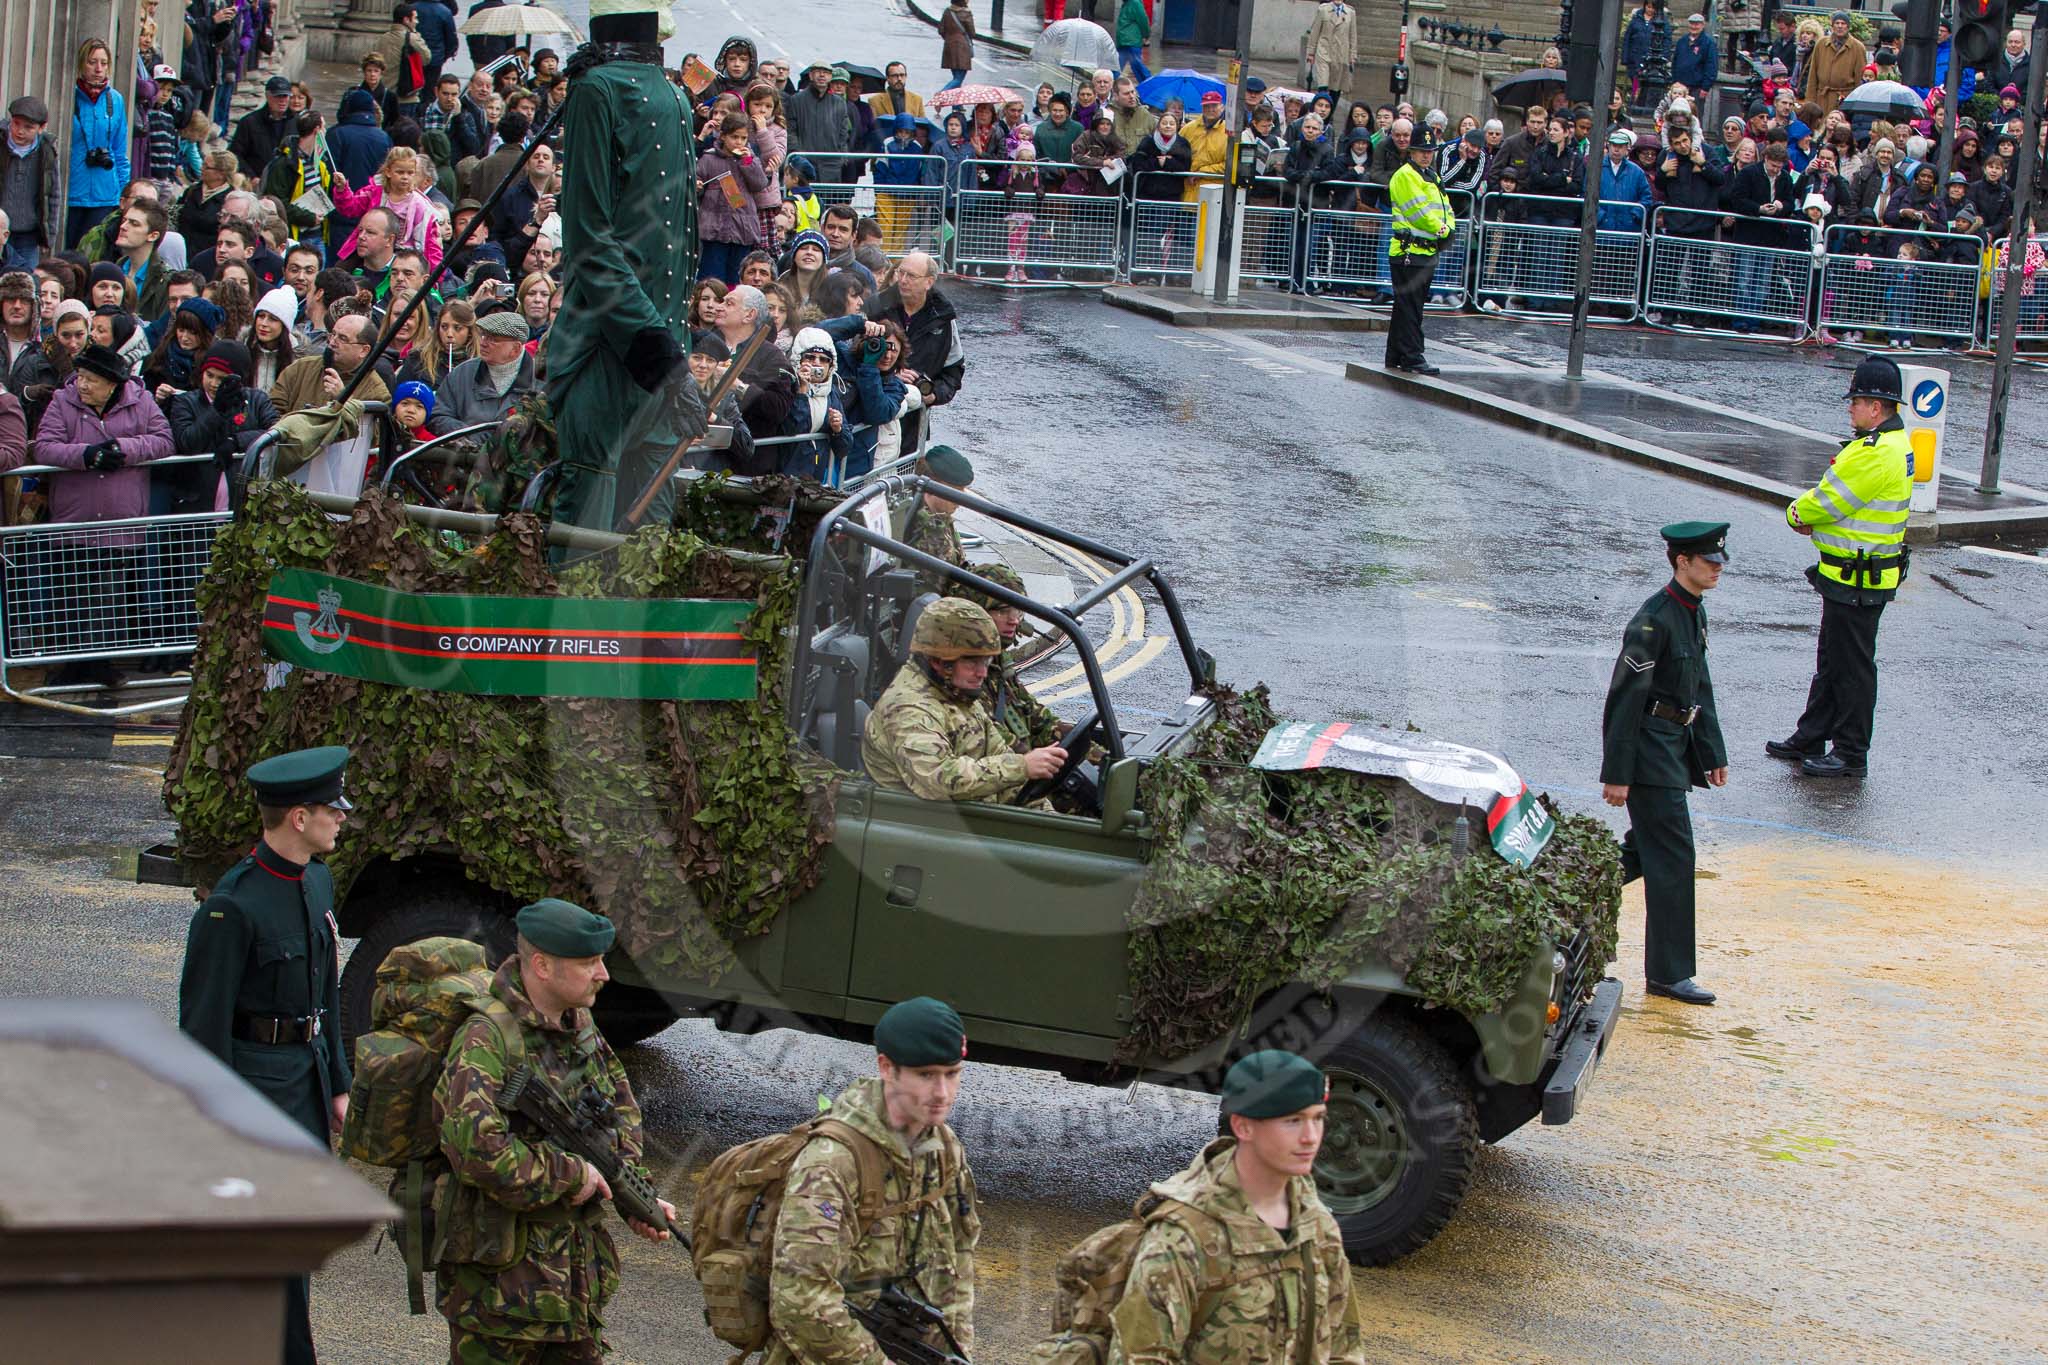 Lord Mayor's Show 2012: Entry 51 - F & G Companies 7 Rifles..
Press stand opposite Mansion House, City of London,
London,
Greater London,
United Kingdom,
on 10 November 2012 at 11:22, image #695